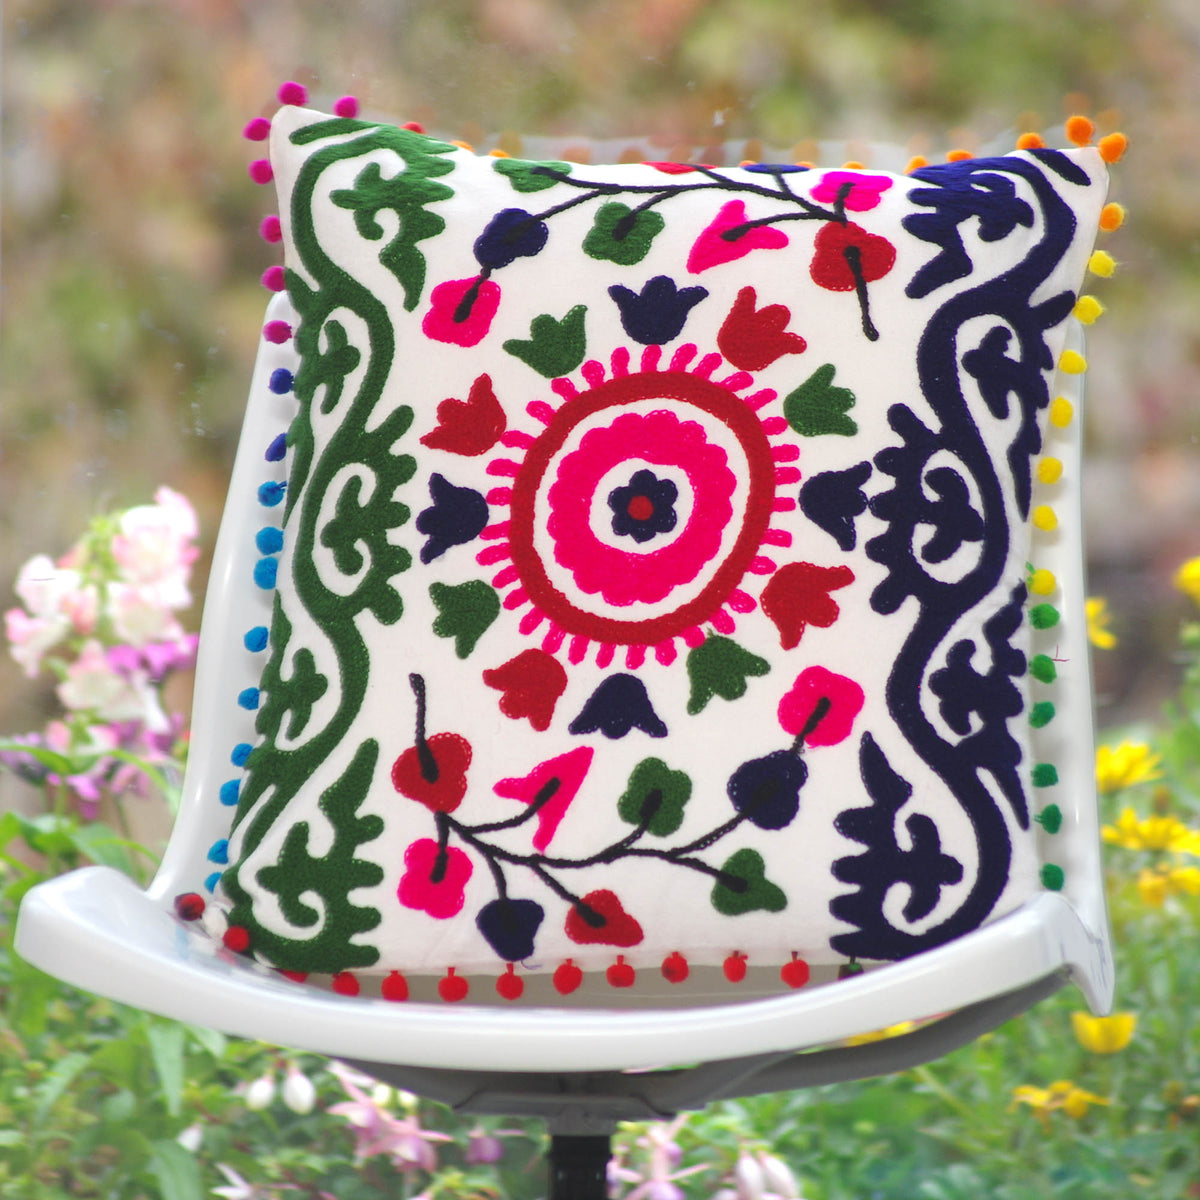 Decorative Suzani Floral Print & Woolen Embroidered Cotton Cushion Cover With Pom Pom